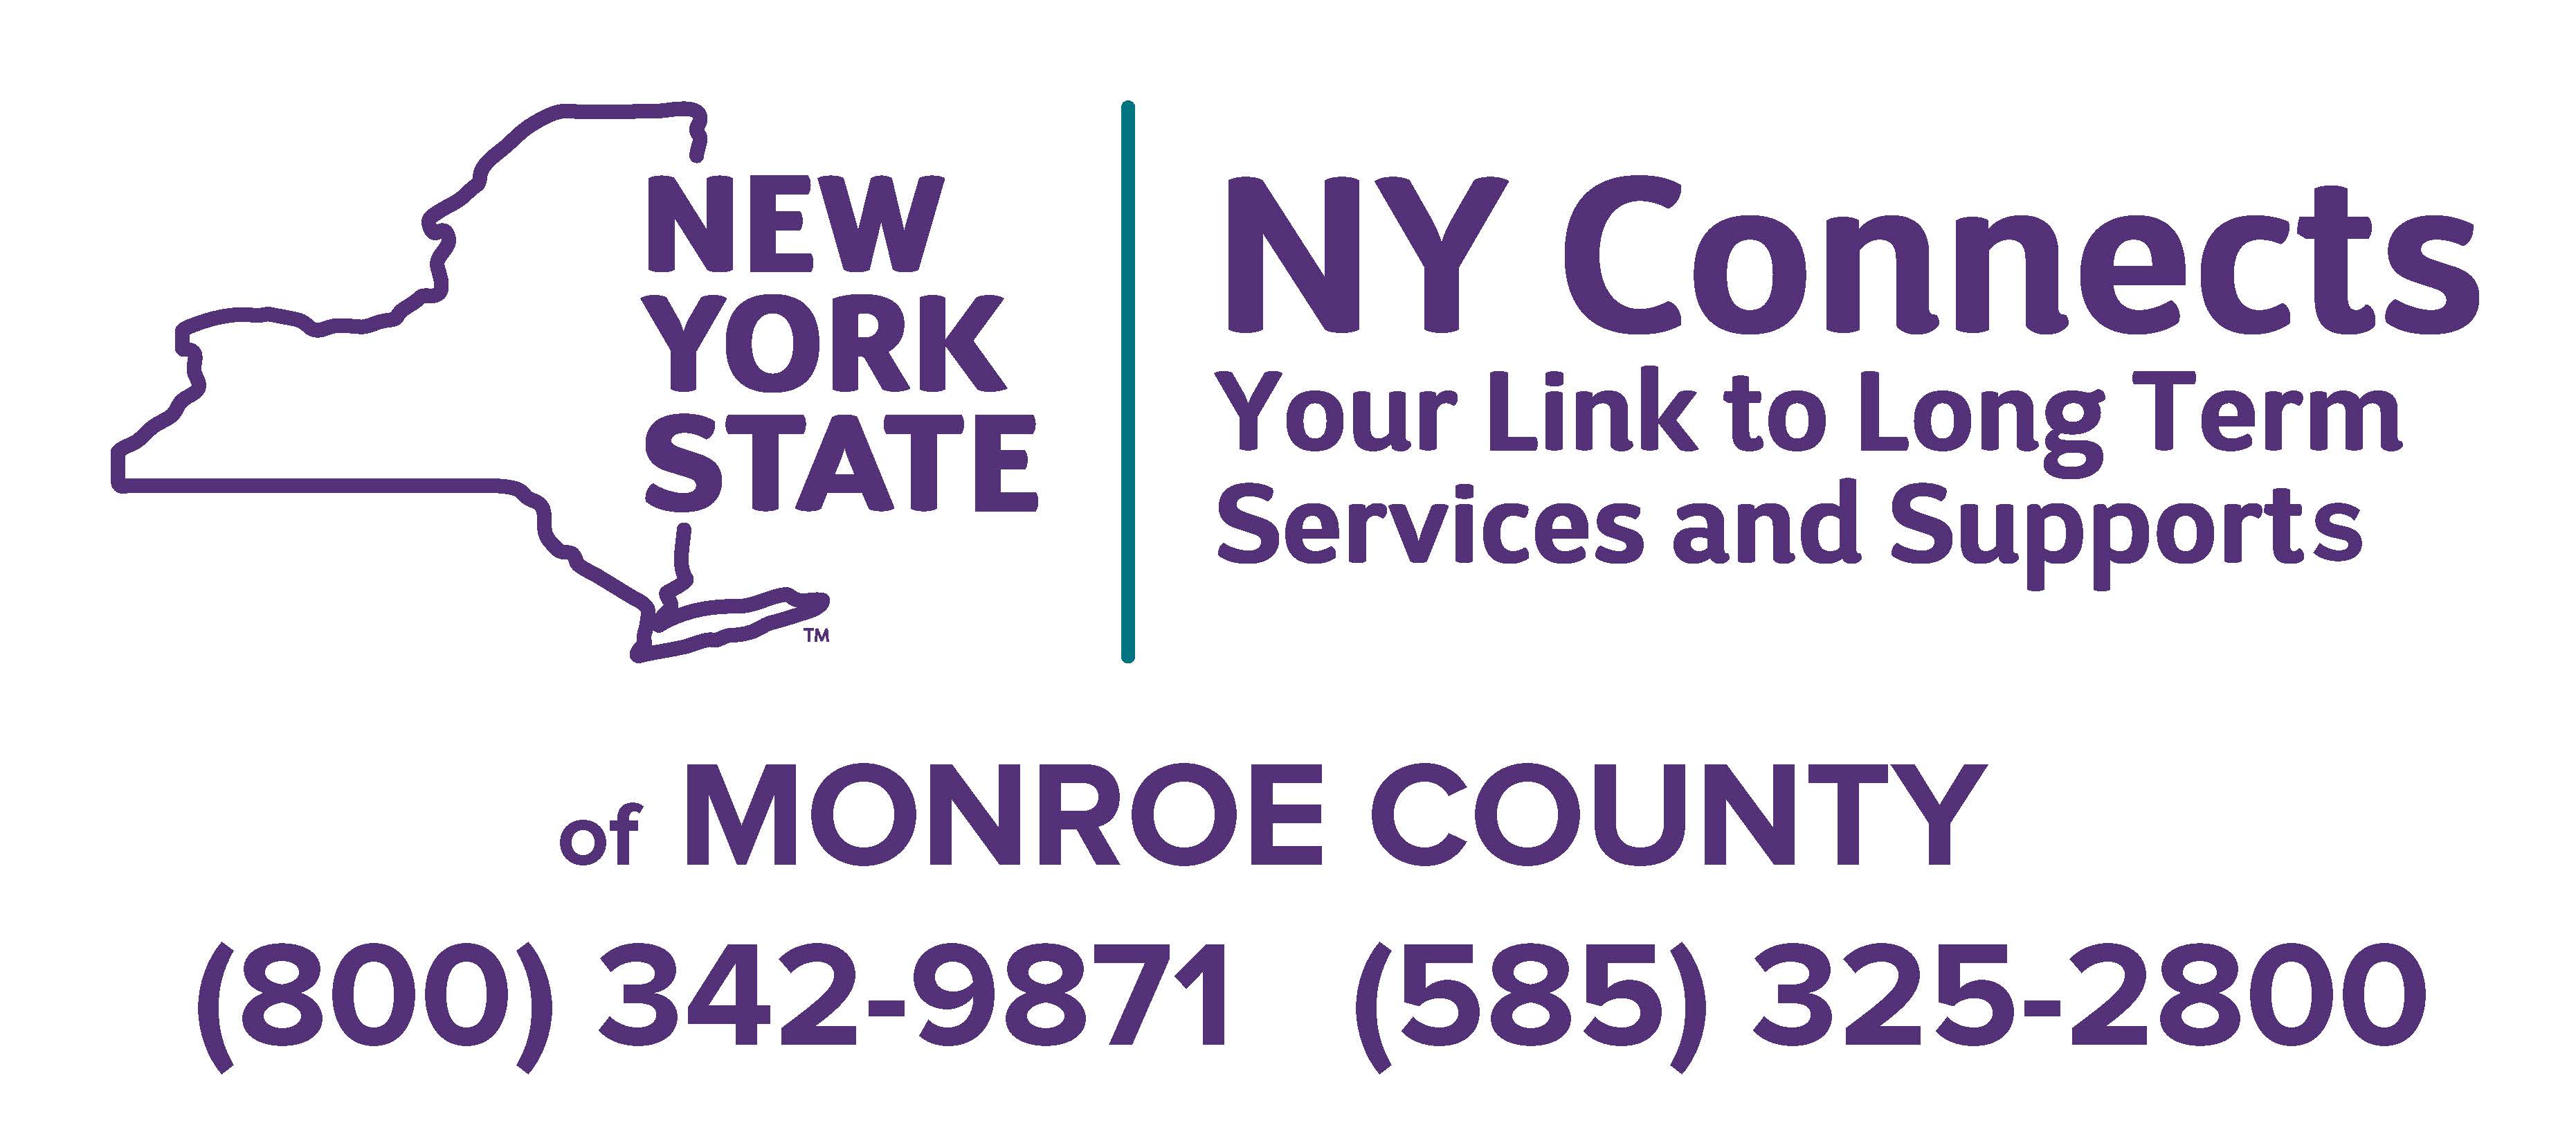 NY Connects of Monroe County, Your Link to Long Term Services and Supports - (800) 342-9871 or (585) 325-2800